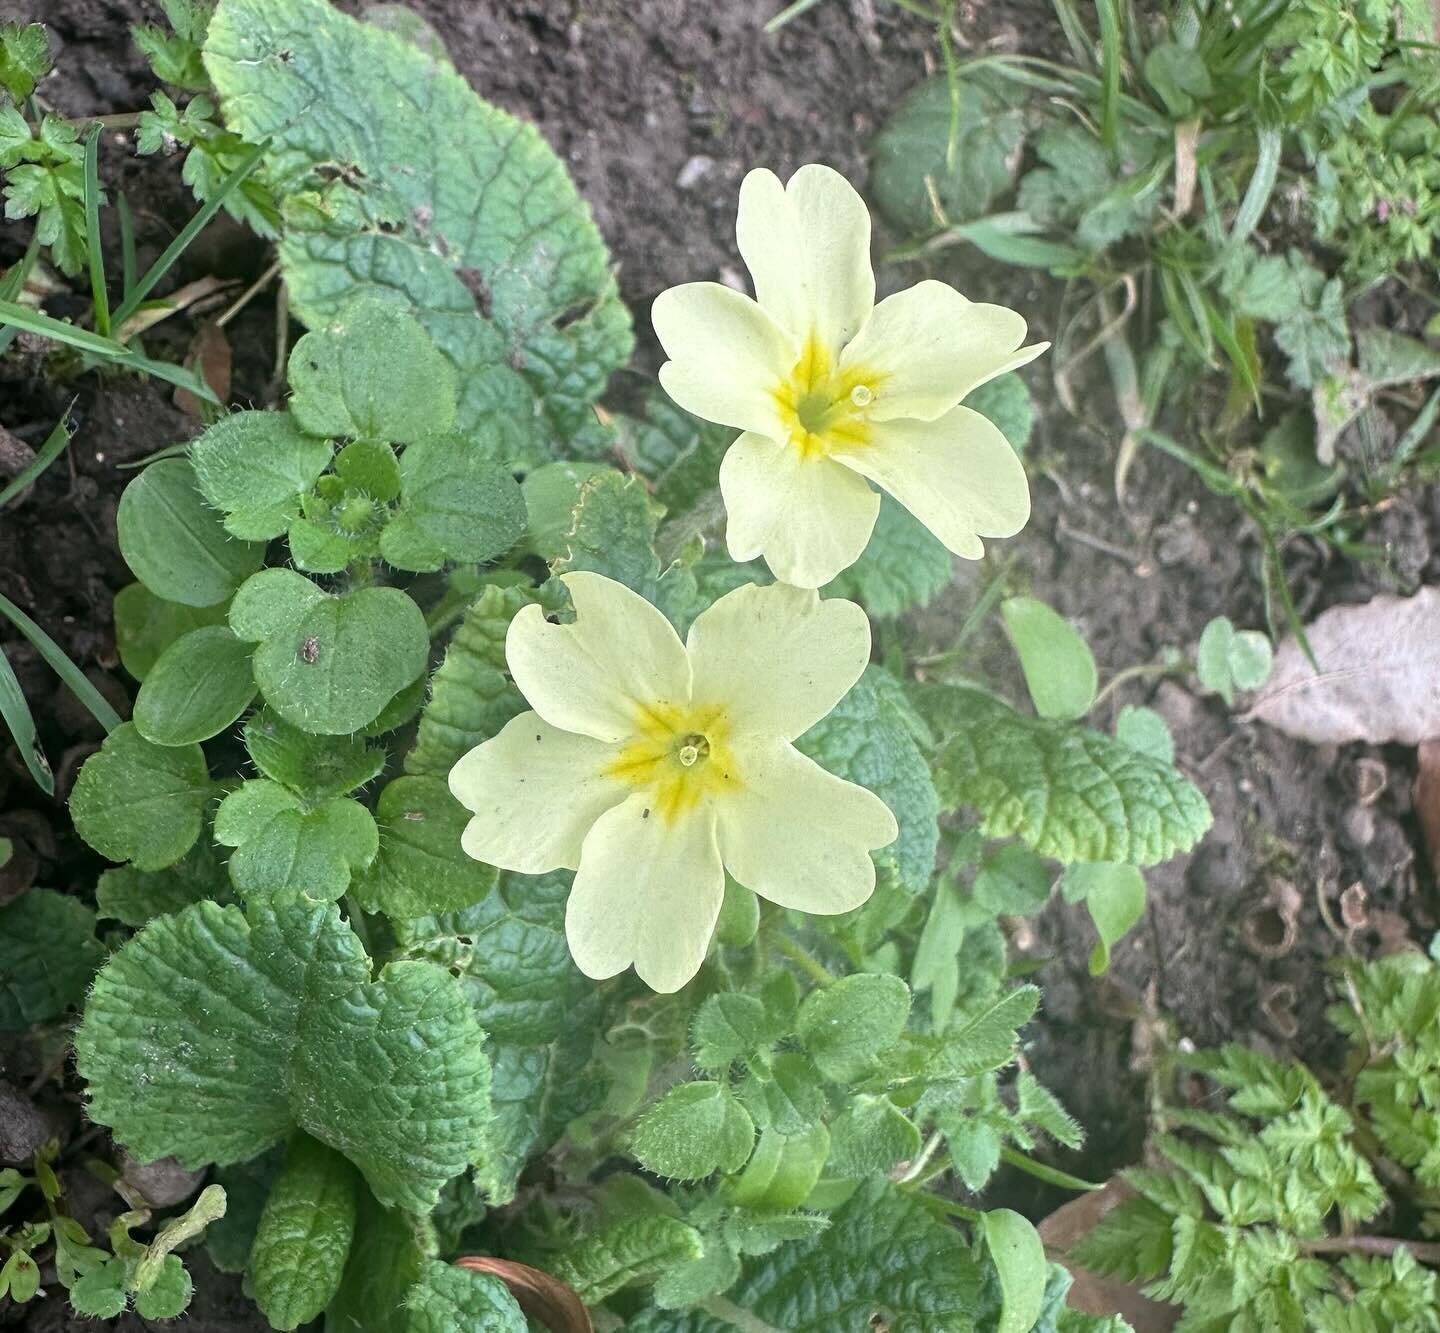 First of the Primroses at Chalkhill. I love their pretty pale yellow flowers. They can flower from January to May and are a source of nectar for early emerging pollinators. Primroses (Primula vulgaris) are a native woodland plant, also under hedgerow